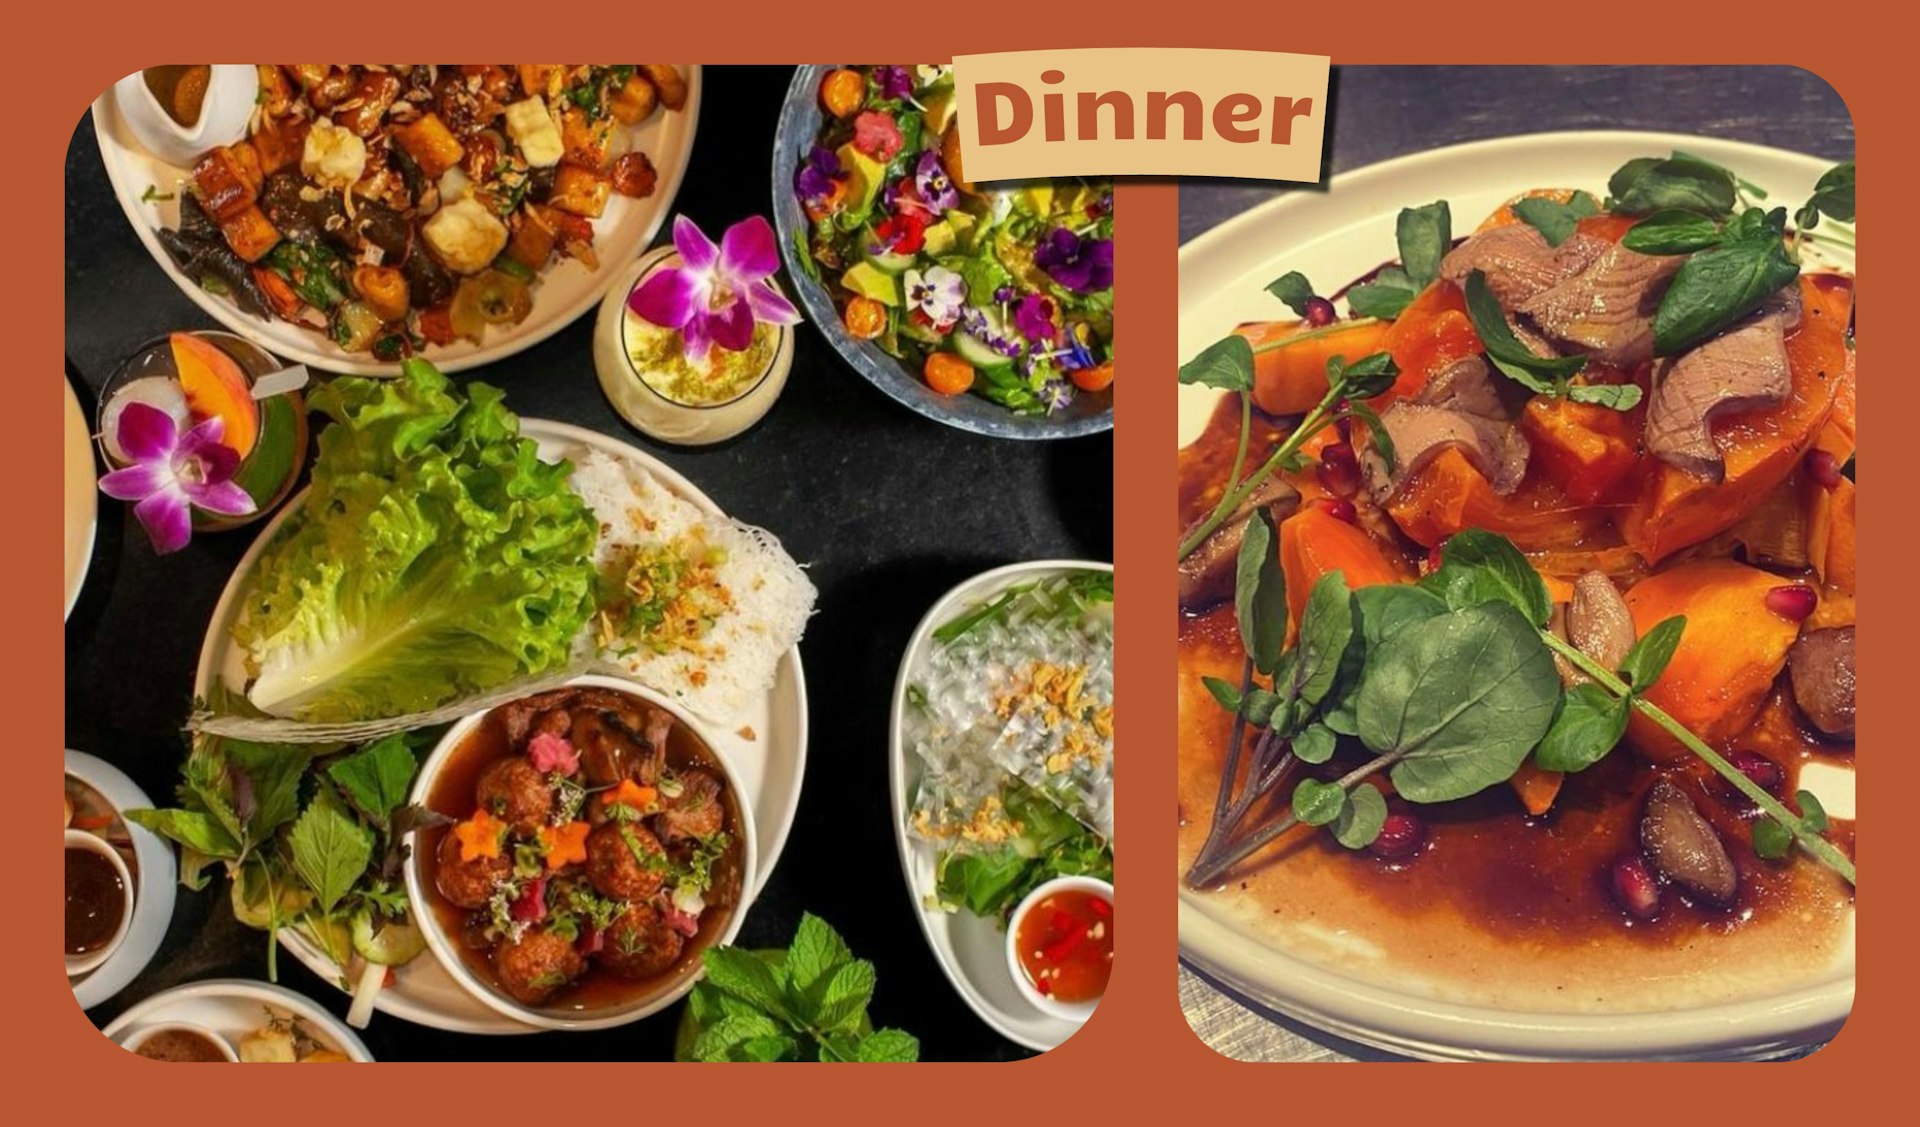 L: A spread of plates of Vietnamese dishes. R: Close-up of a duck and persimmon dish